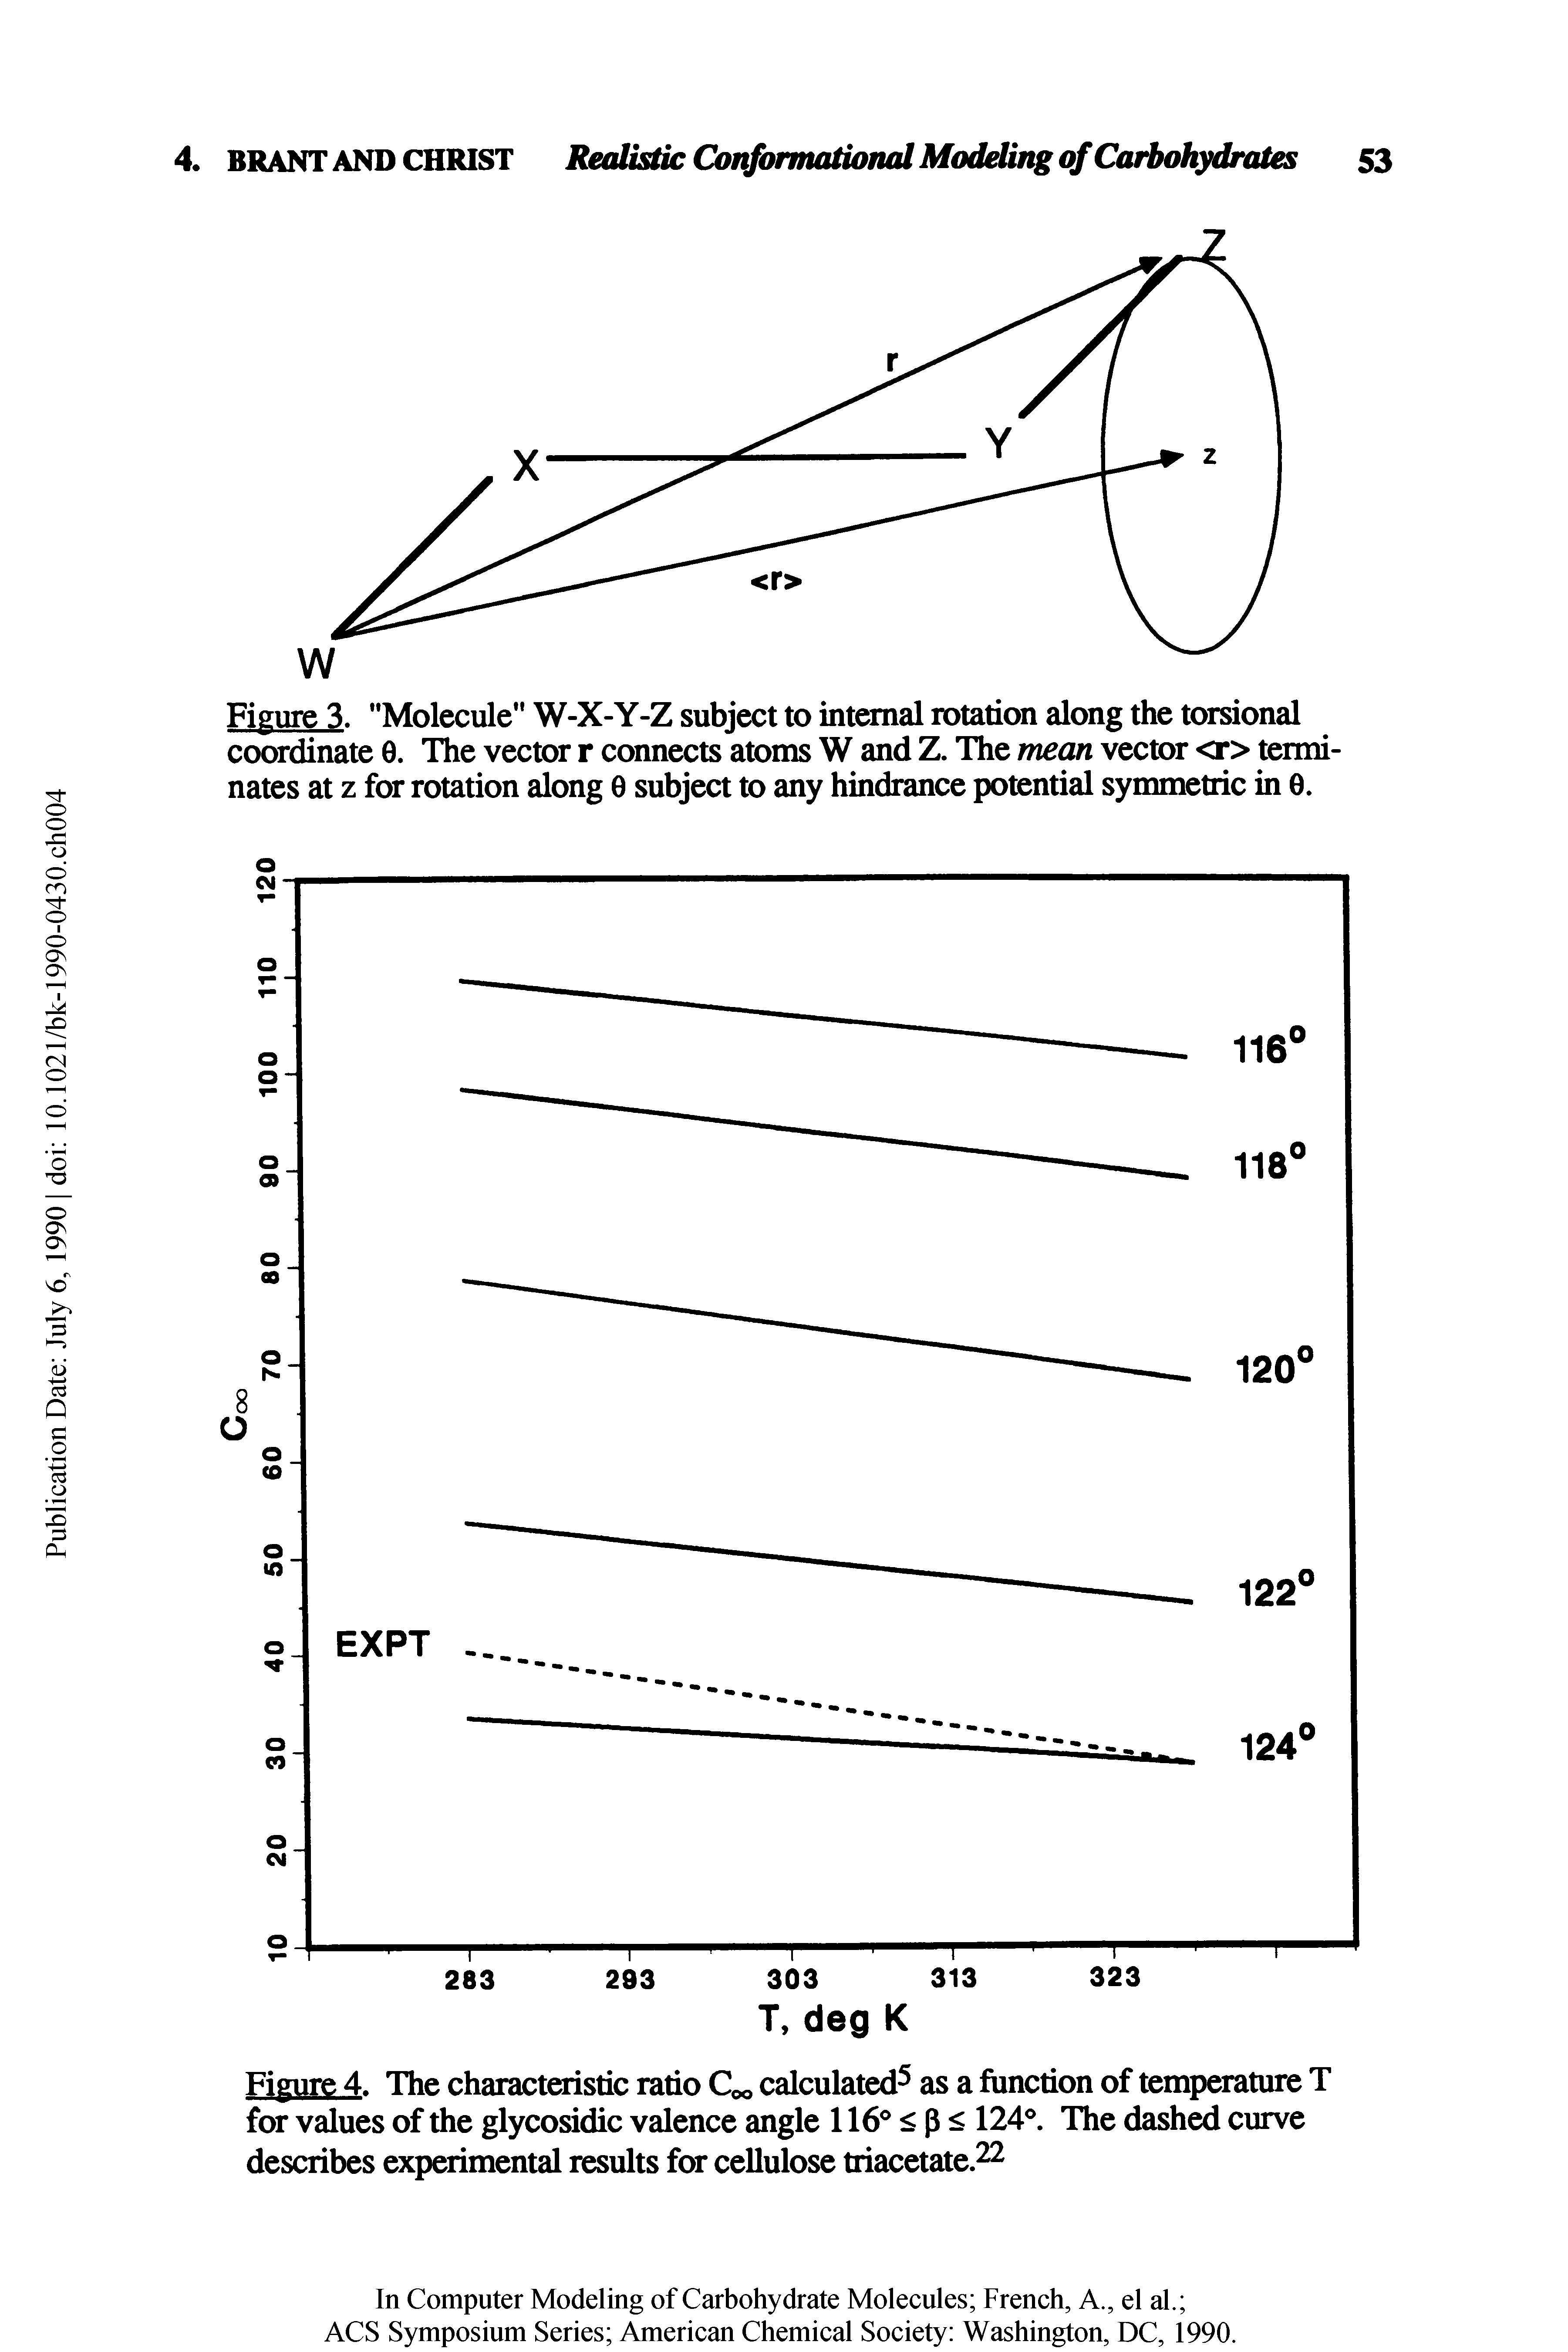 Figure 4. The characteristic ratio Coo calculated as a function of temperature T for values of the glycosidic valence angle 116 p < 124 . The dashed curve describes experimental results for cellulose triacetate.22...